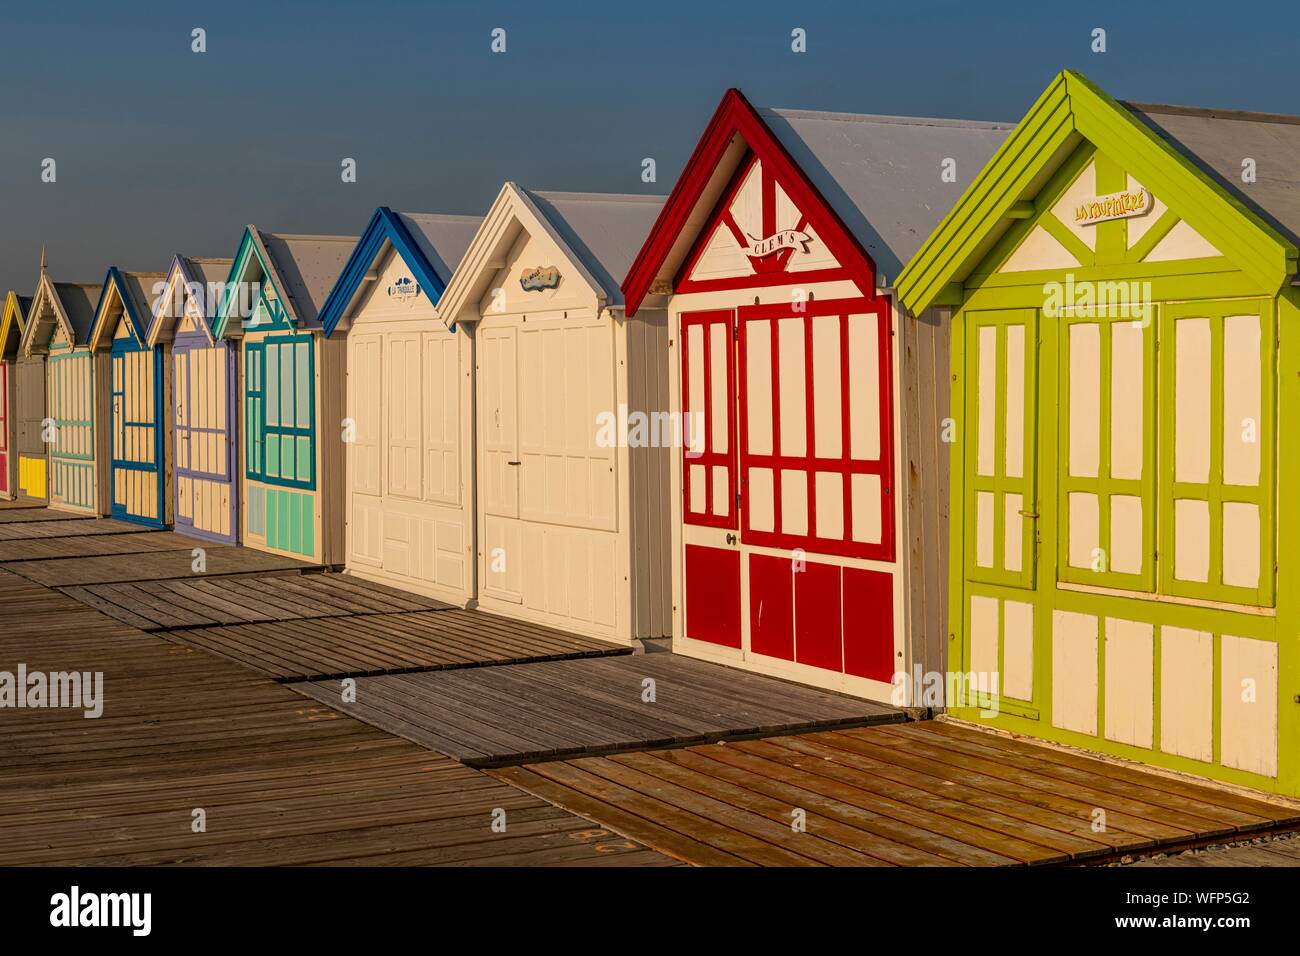 France, Somme, Cayeux sur Mer, The path boards in Cayeux sur Mer is the longest in Europe, it sports its colorful beach cabins with evocative names on nearly 2 km long on the pebble cord Stock Photo